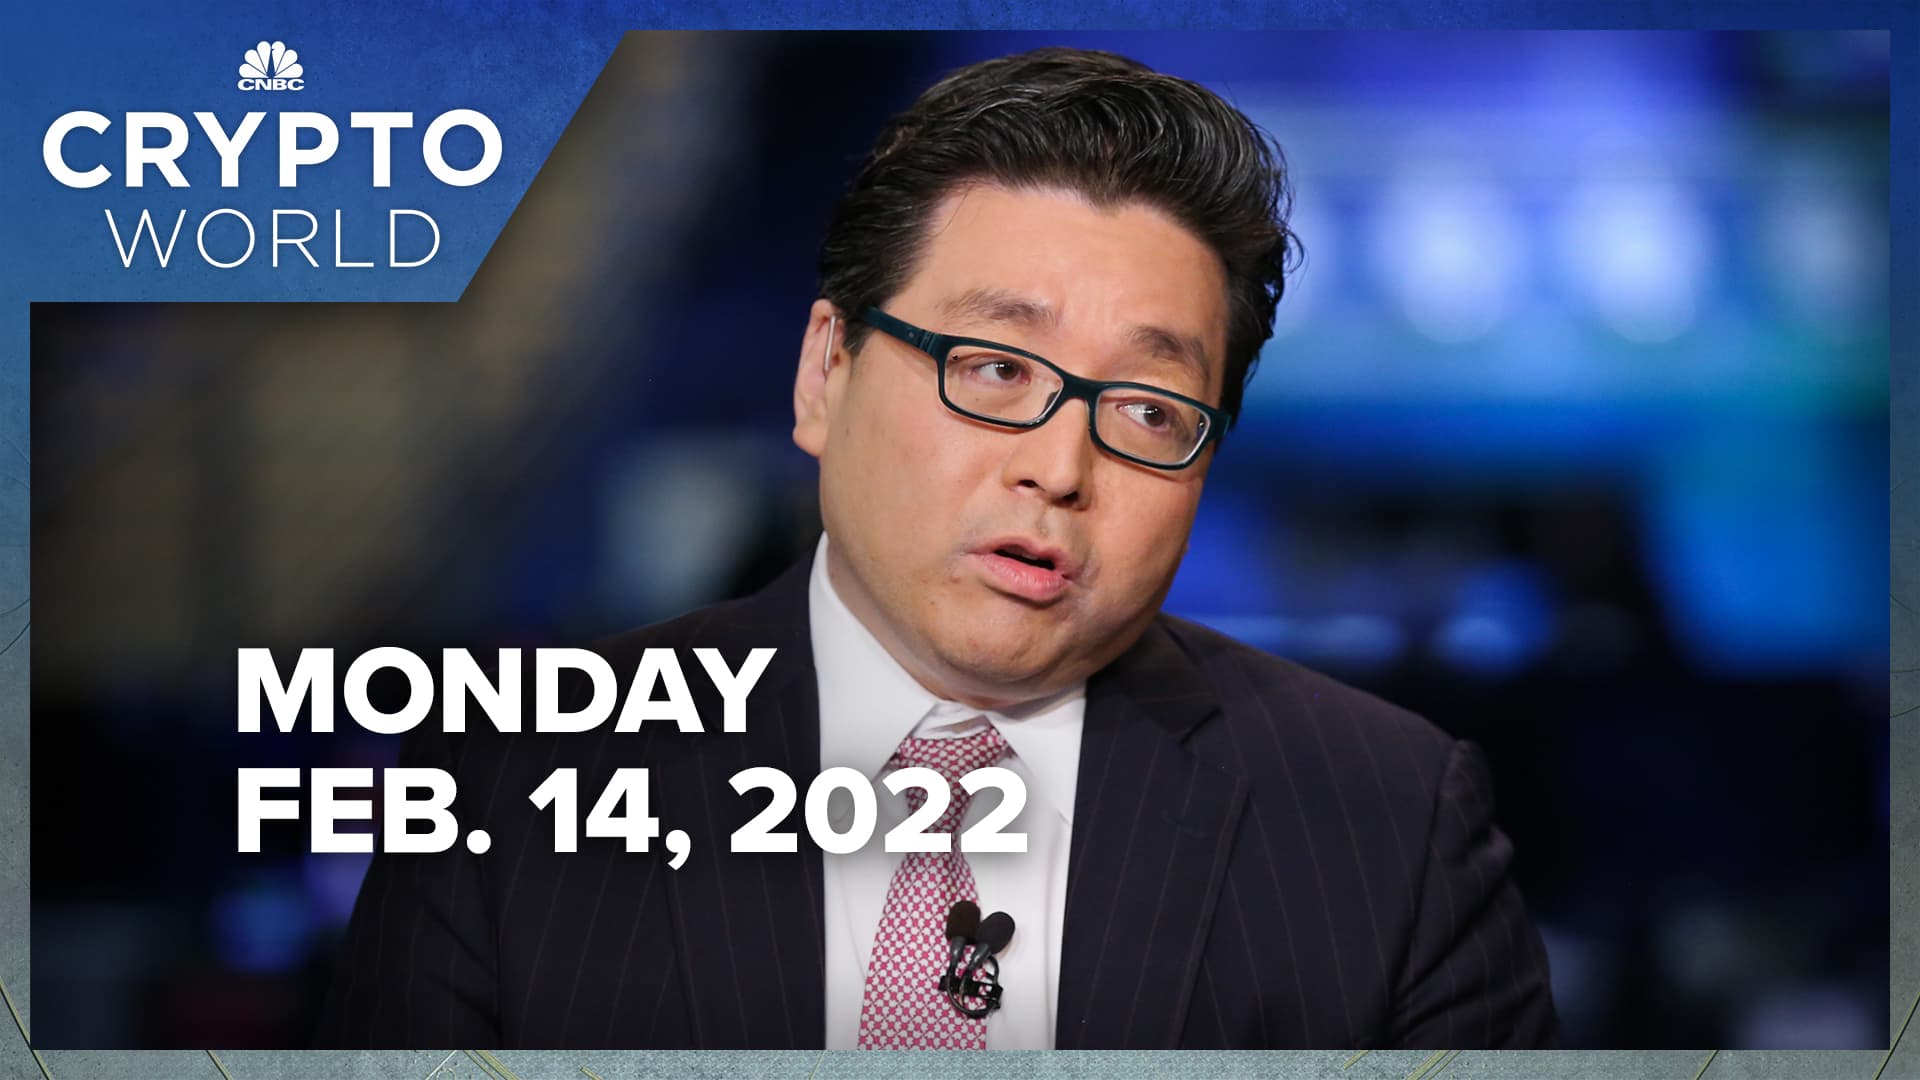 Watch CNBC's full interview with Tom Lee on crypto's 2022 outlook